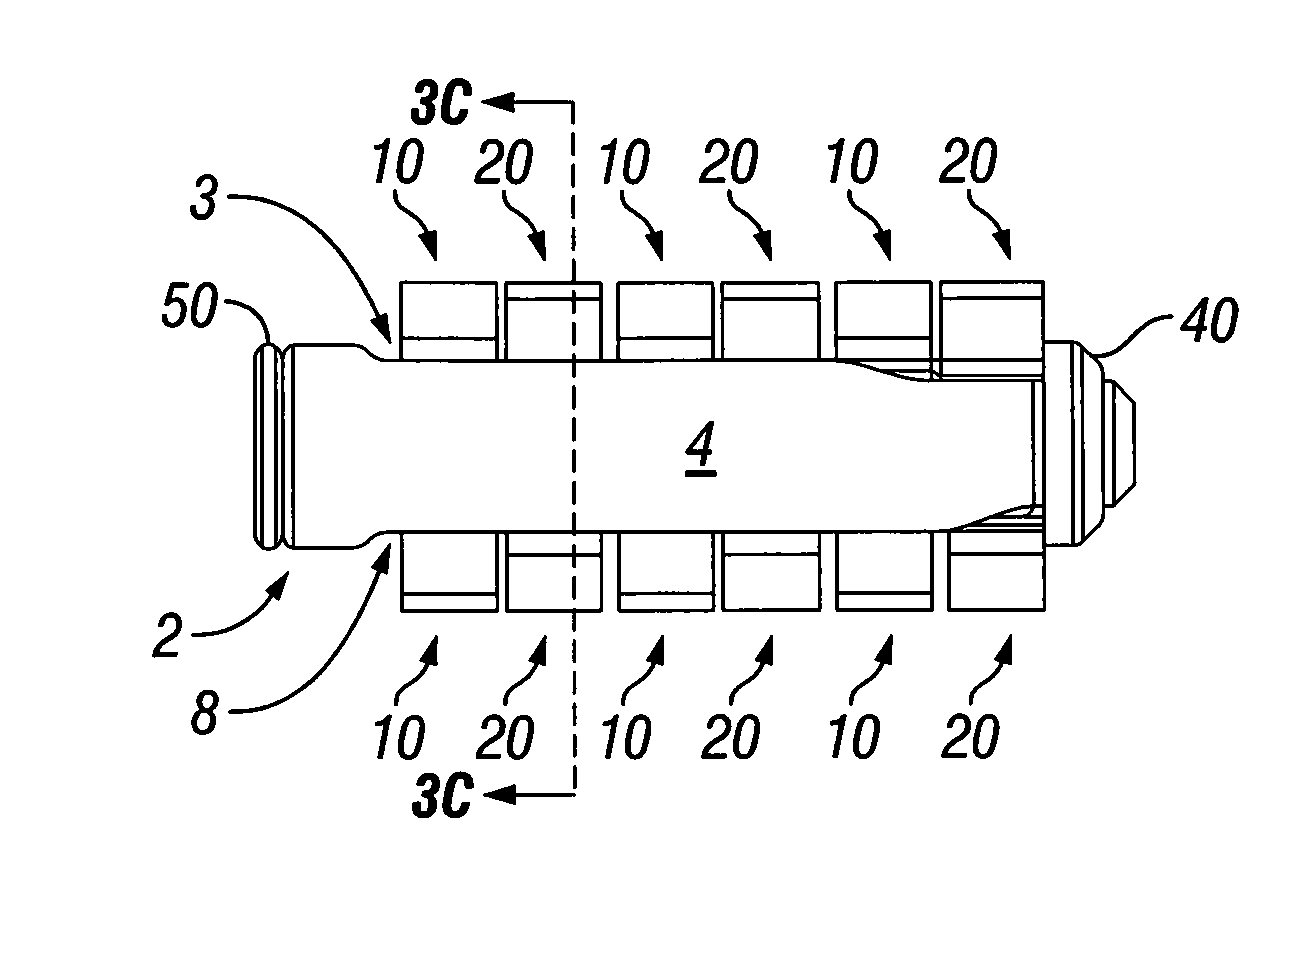 Expandable Intervertebral Spacer and Method of Posterior Insertion Thereof